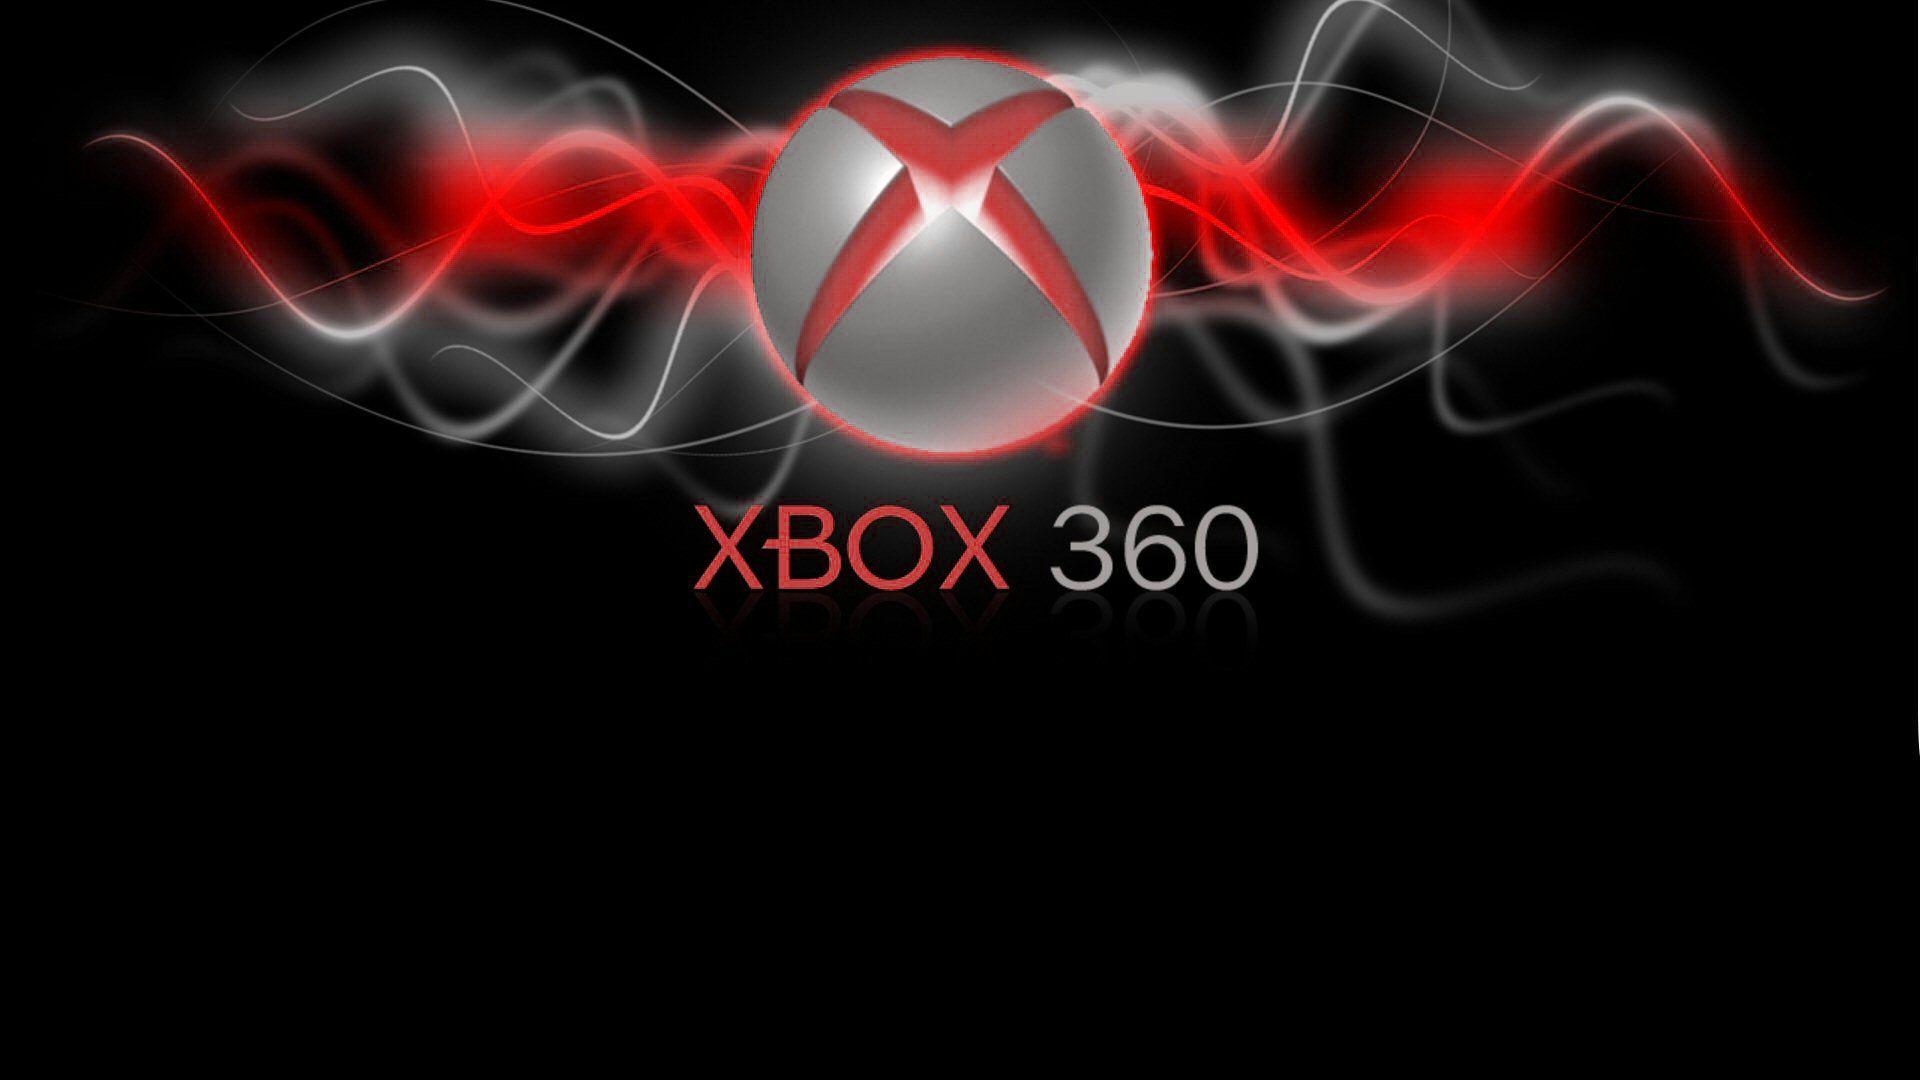 Red Xbox Wallpapers Top Free Red Xbox Backgrounds Wallpaperaccess